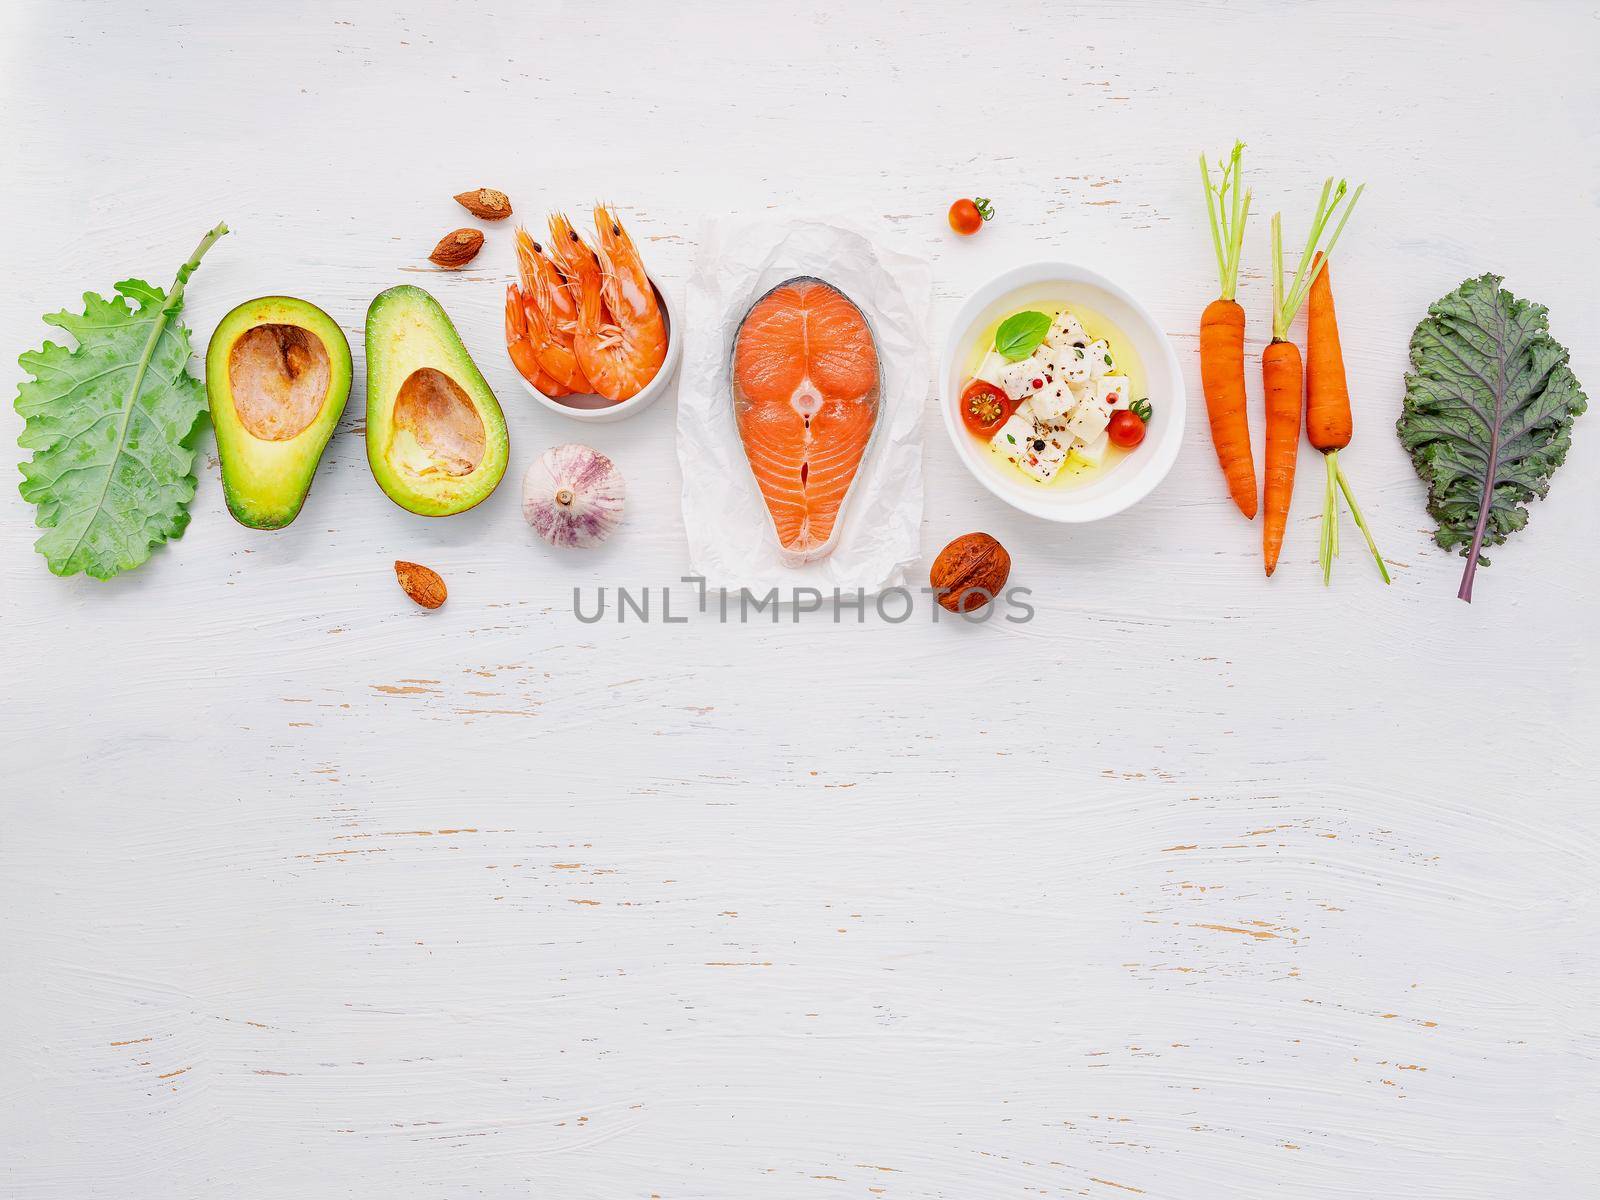 Ketogenic low carbs diet concept. Ingredients for healthy foods selection set up on white wooden background. by kerdkanno